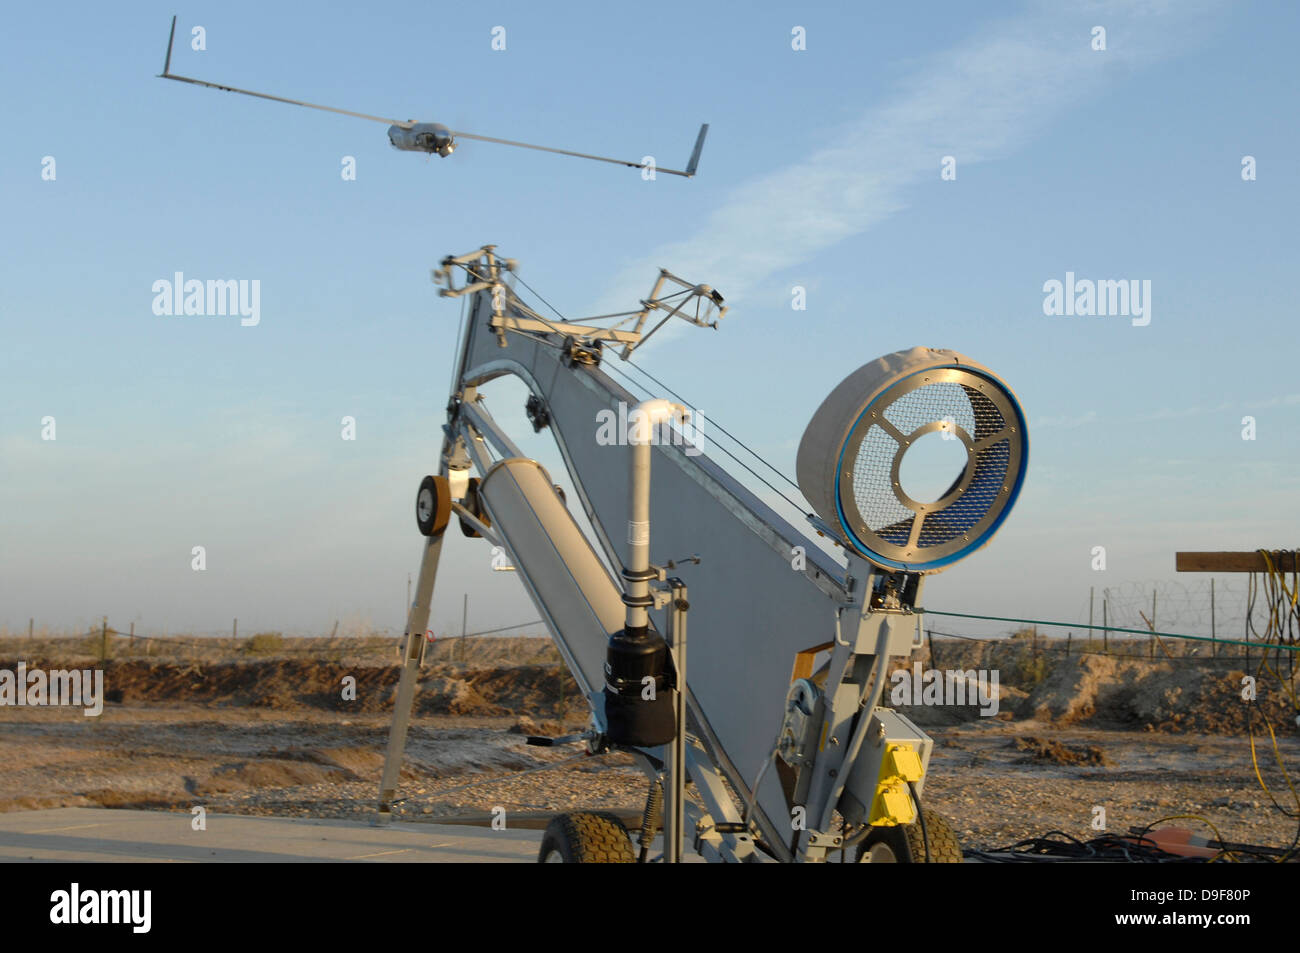 December 28, 2007 - An Australian Scan Eagle unmanned aerial vehicle launches from Ali Air Base, Iraq. Stock Photo